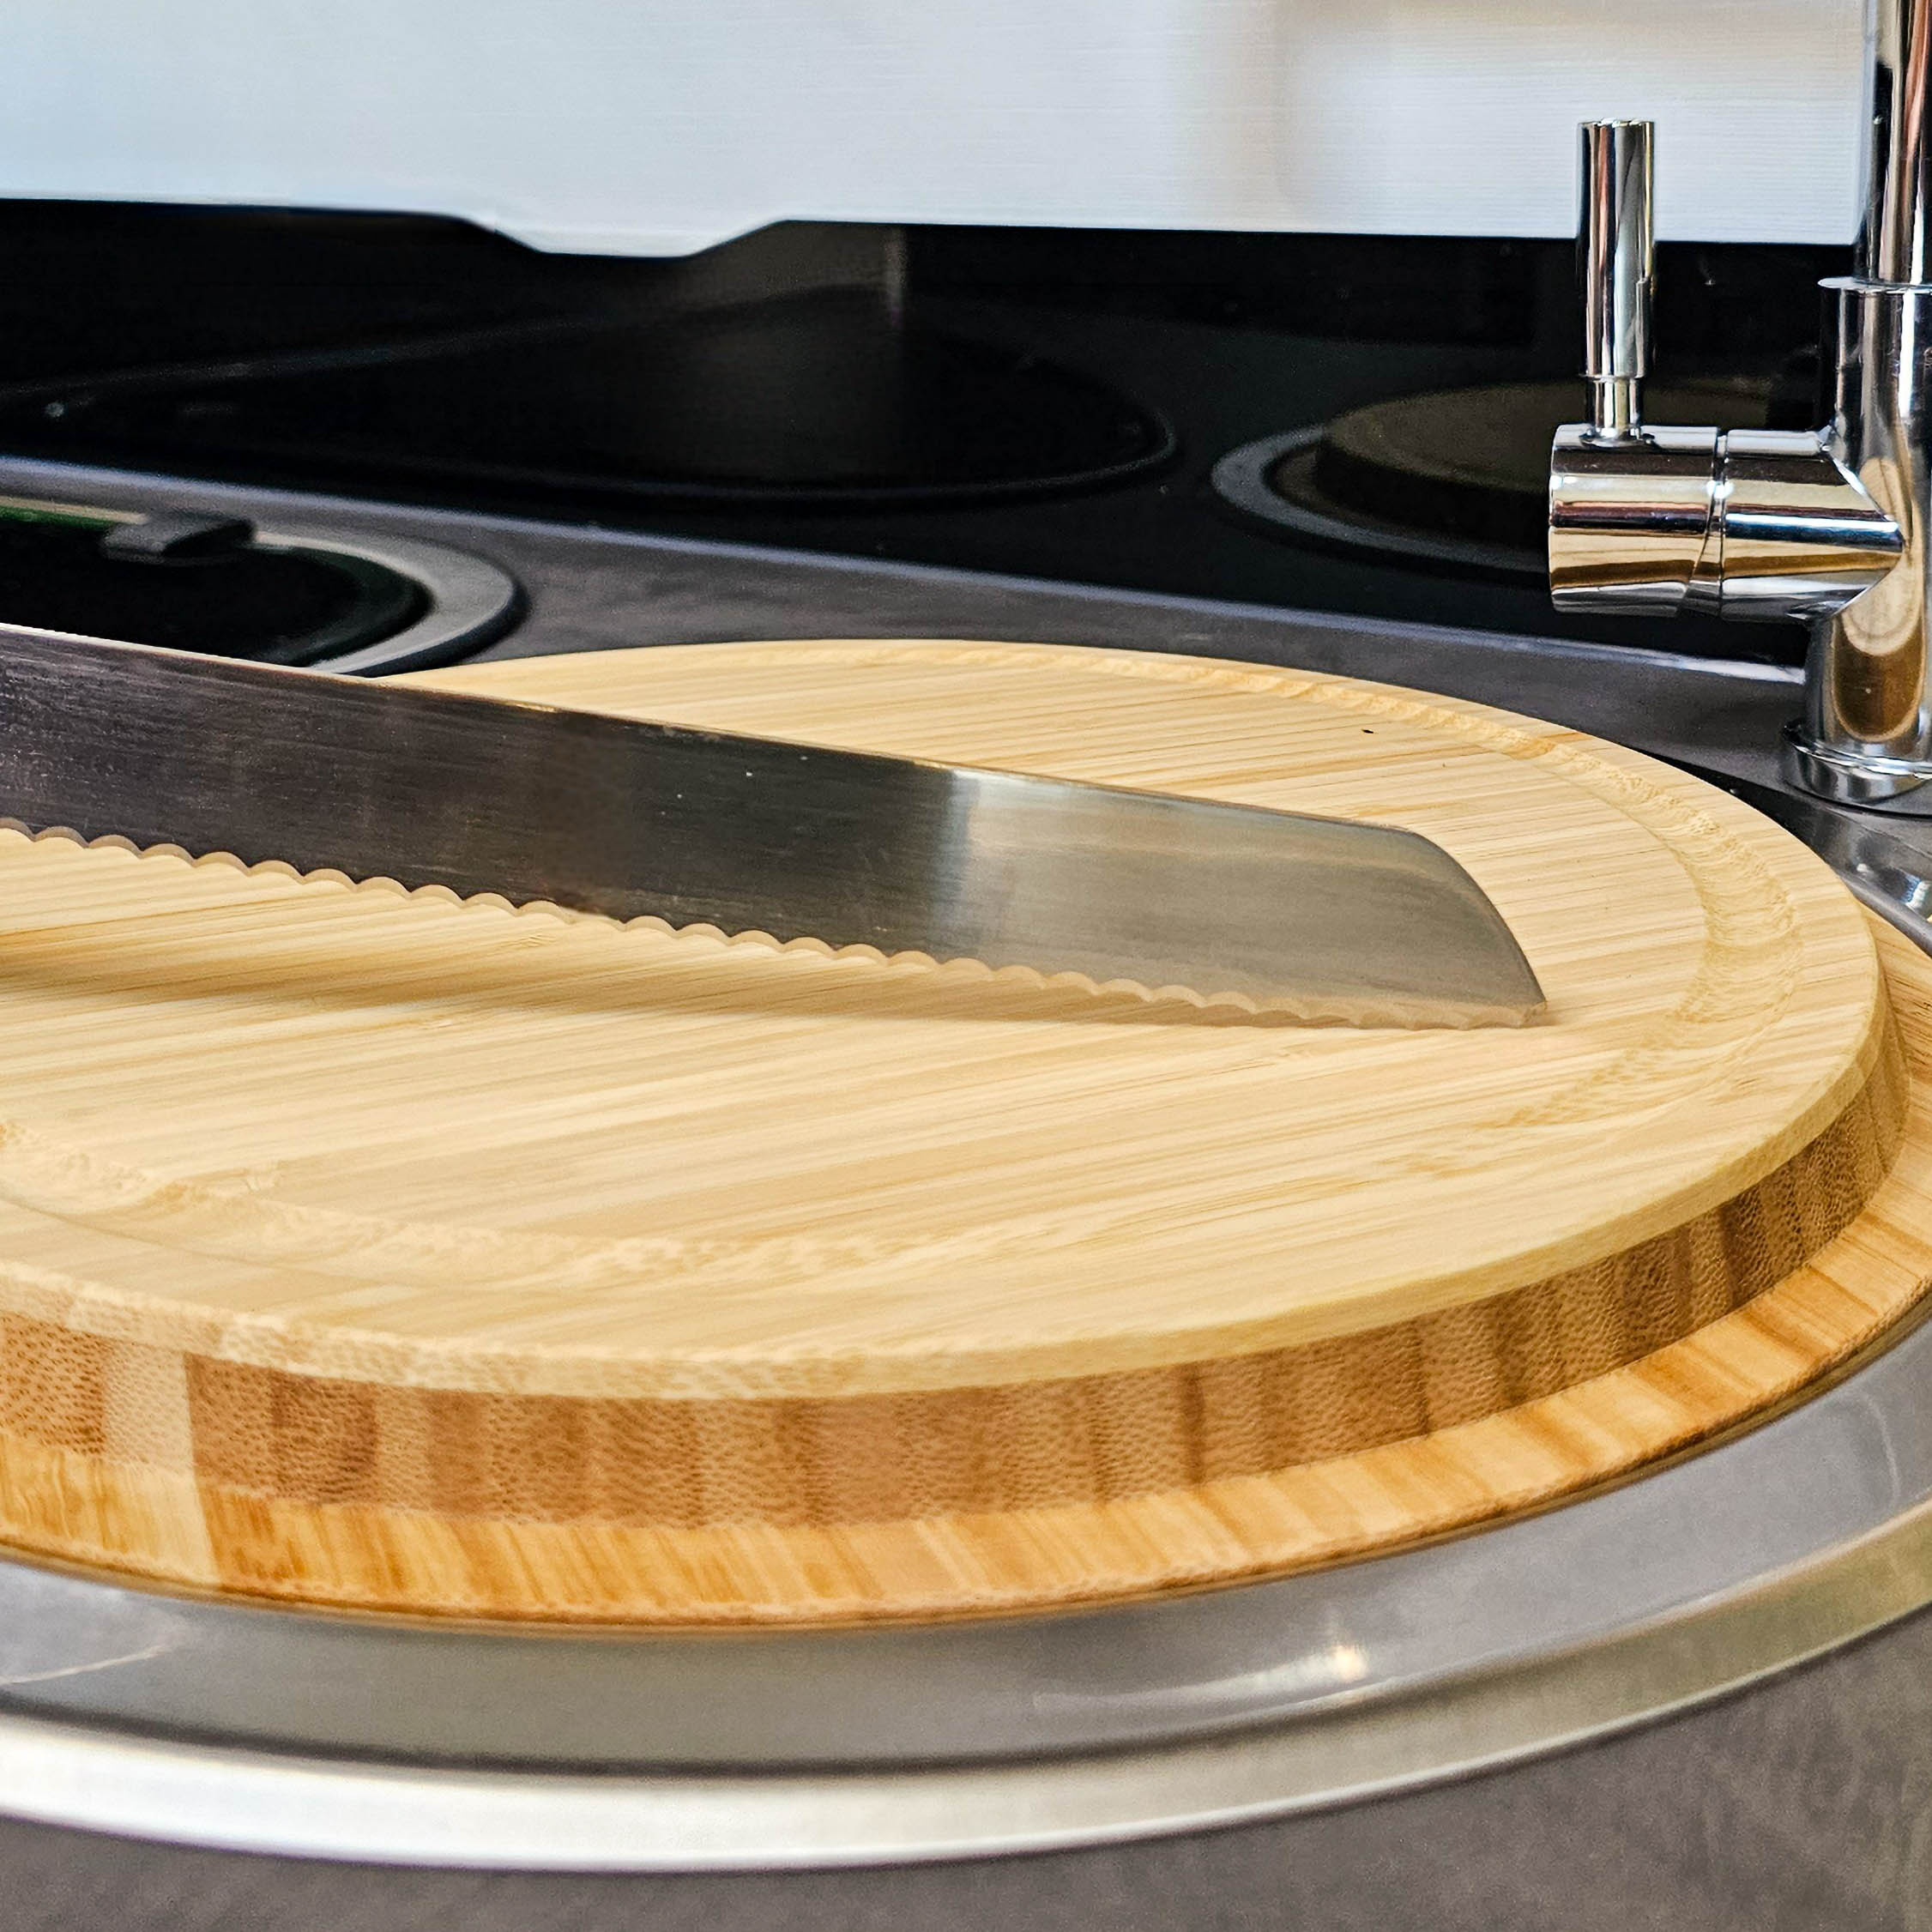 Cutting board with sink cover for Challenger